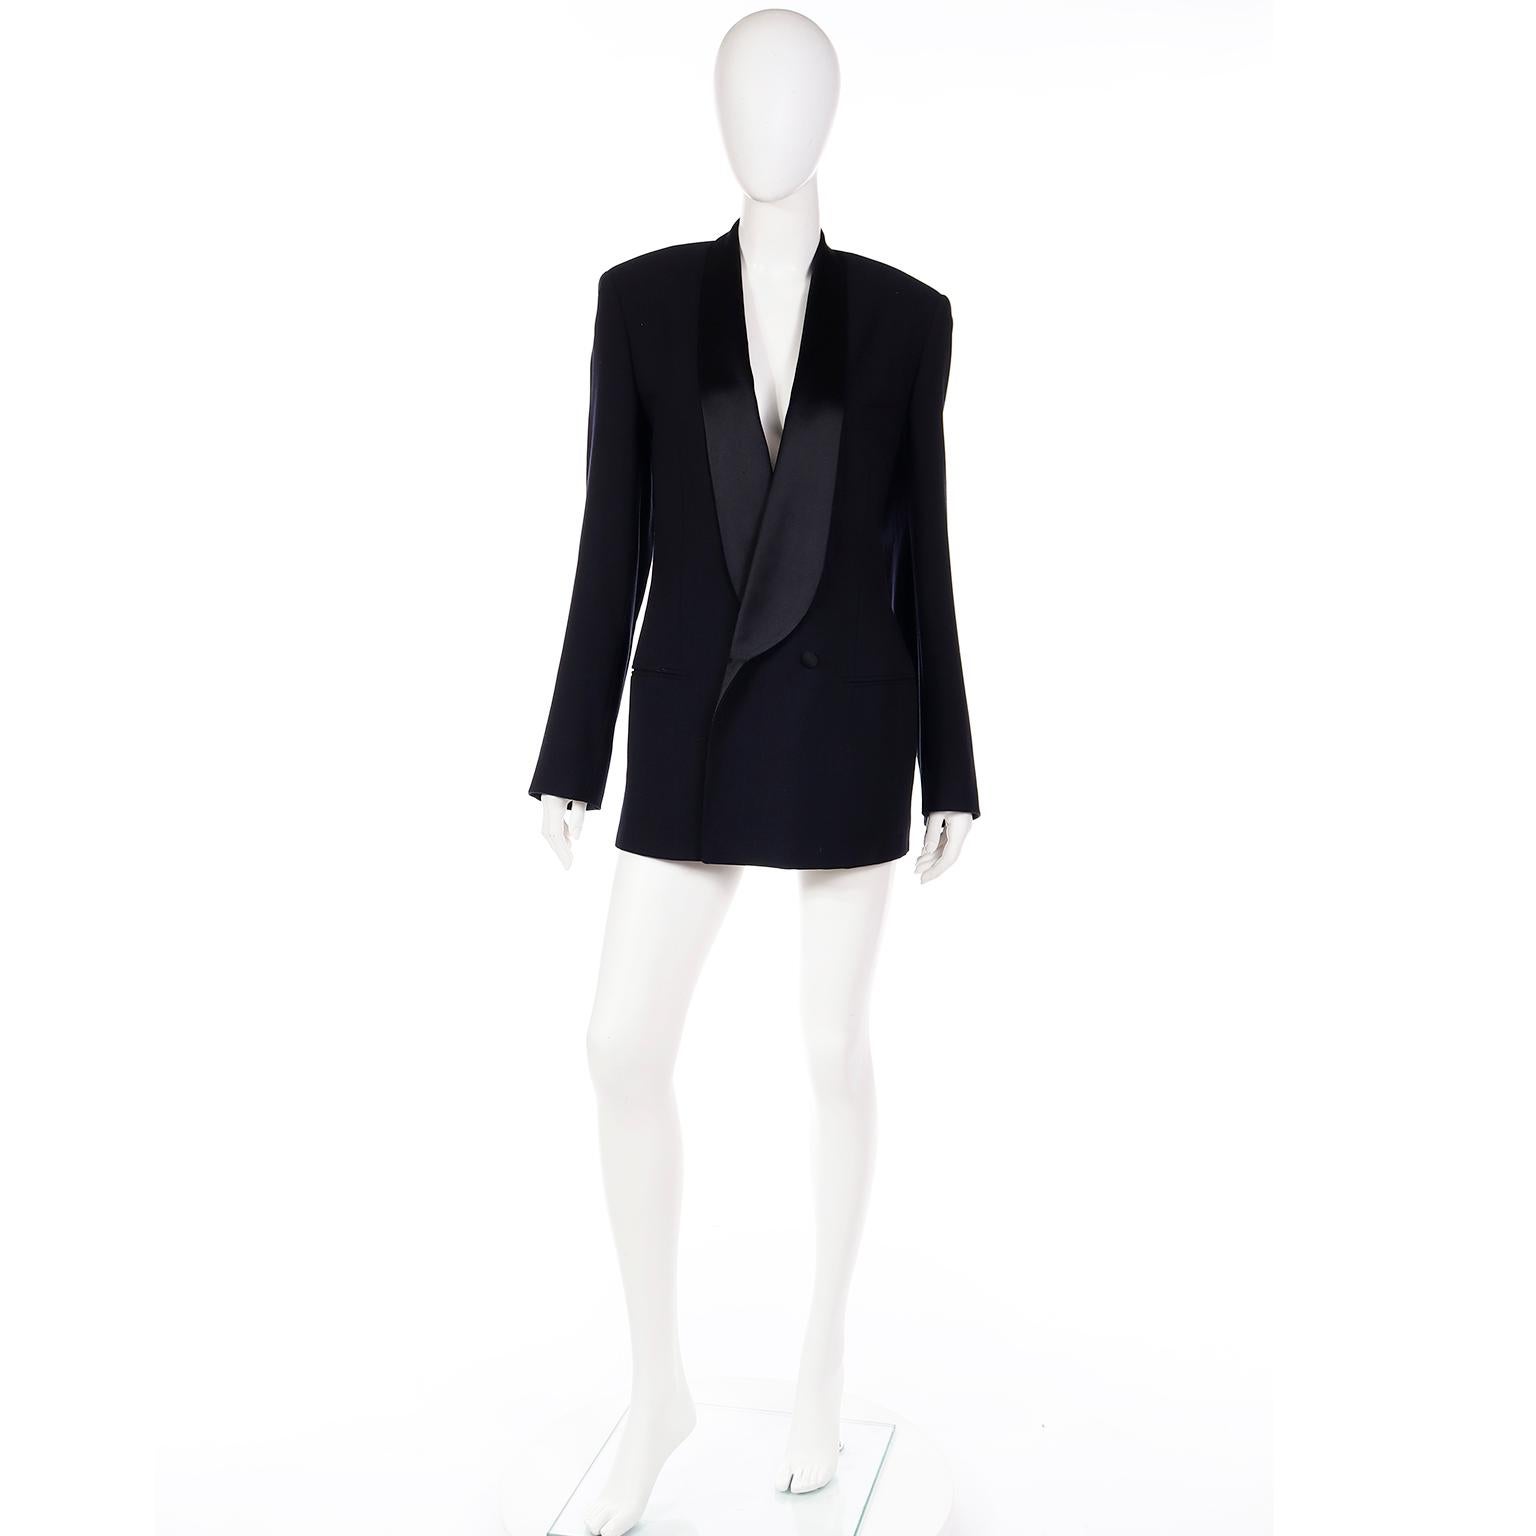 This stunning vintage Giorgio Armani black wool blazer with black silk satin lapels and black satin silk covered buttons. This particular jacket is uniquely designed with a very low V front.  We love these Armani vintage tuxedo jackets and this one